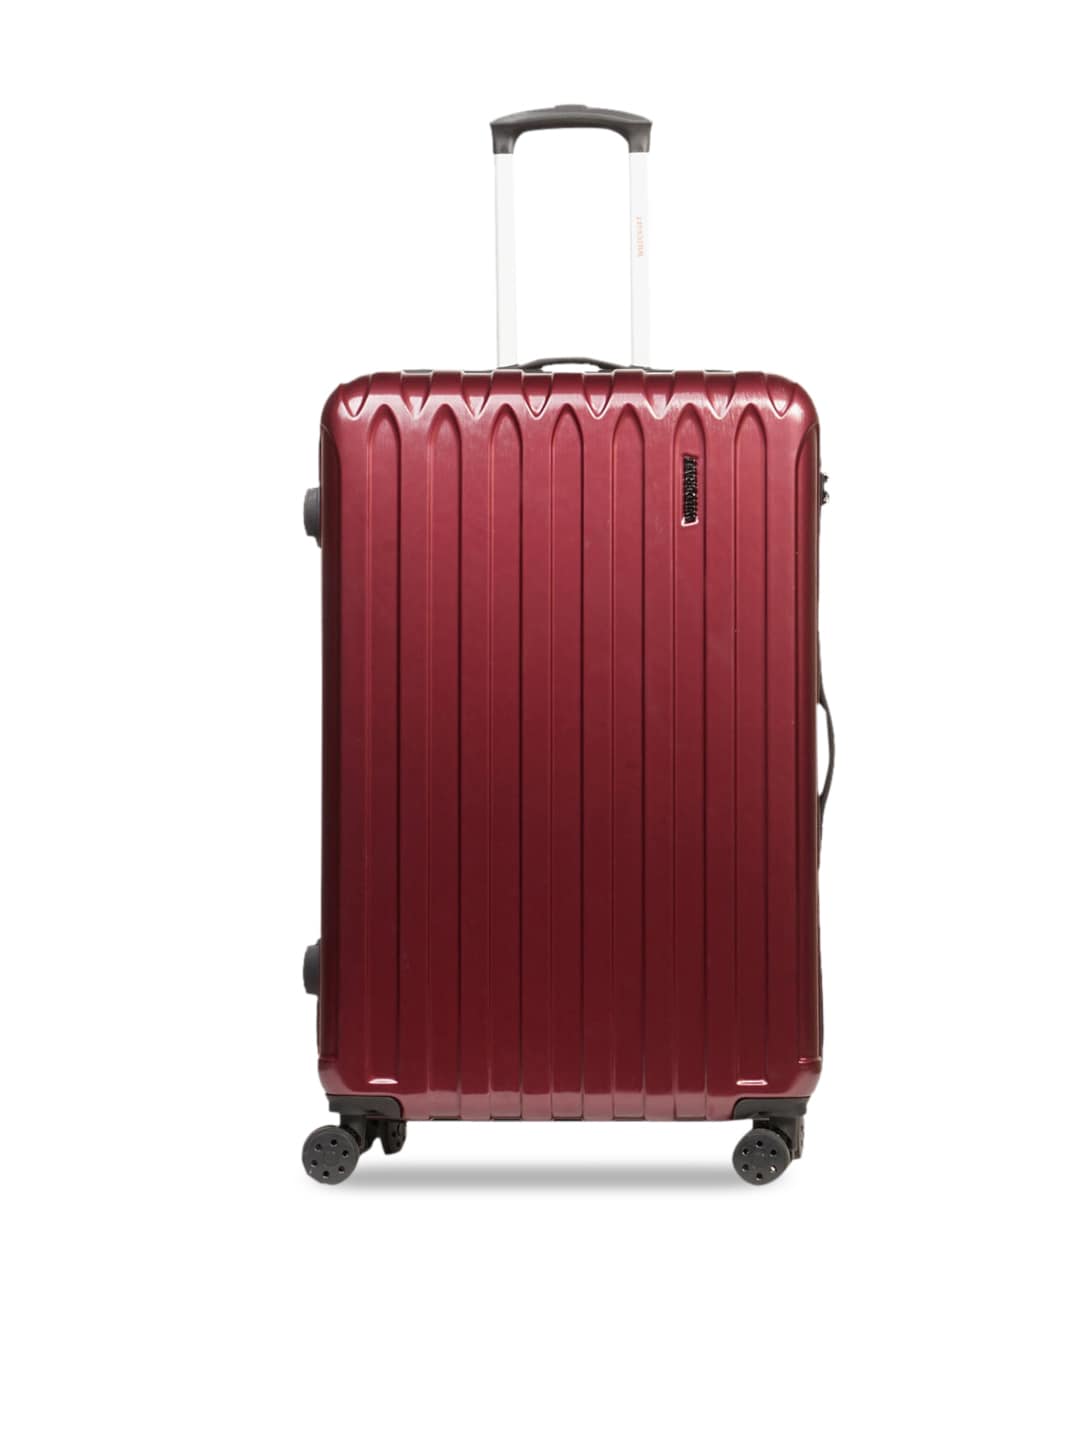 Wildcraft Burgundy-Coloured Textured Hard-Sided Large Trolley Suitcase Price in India